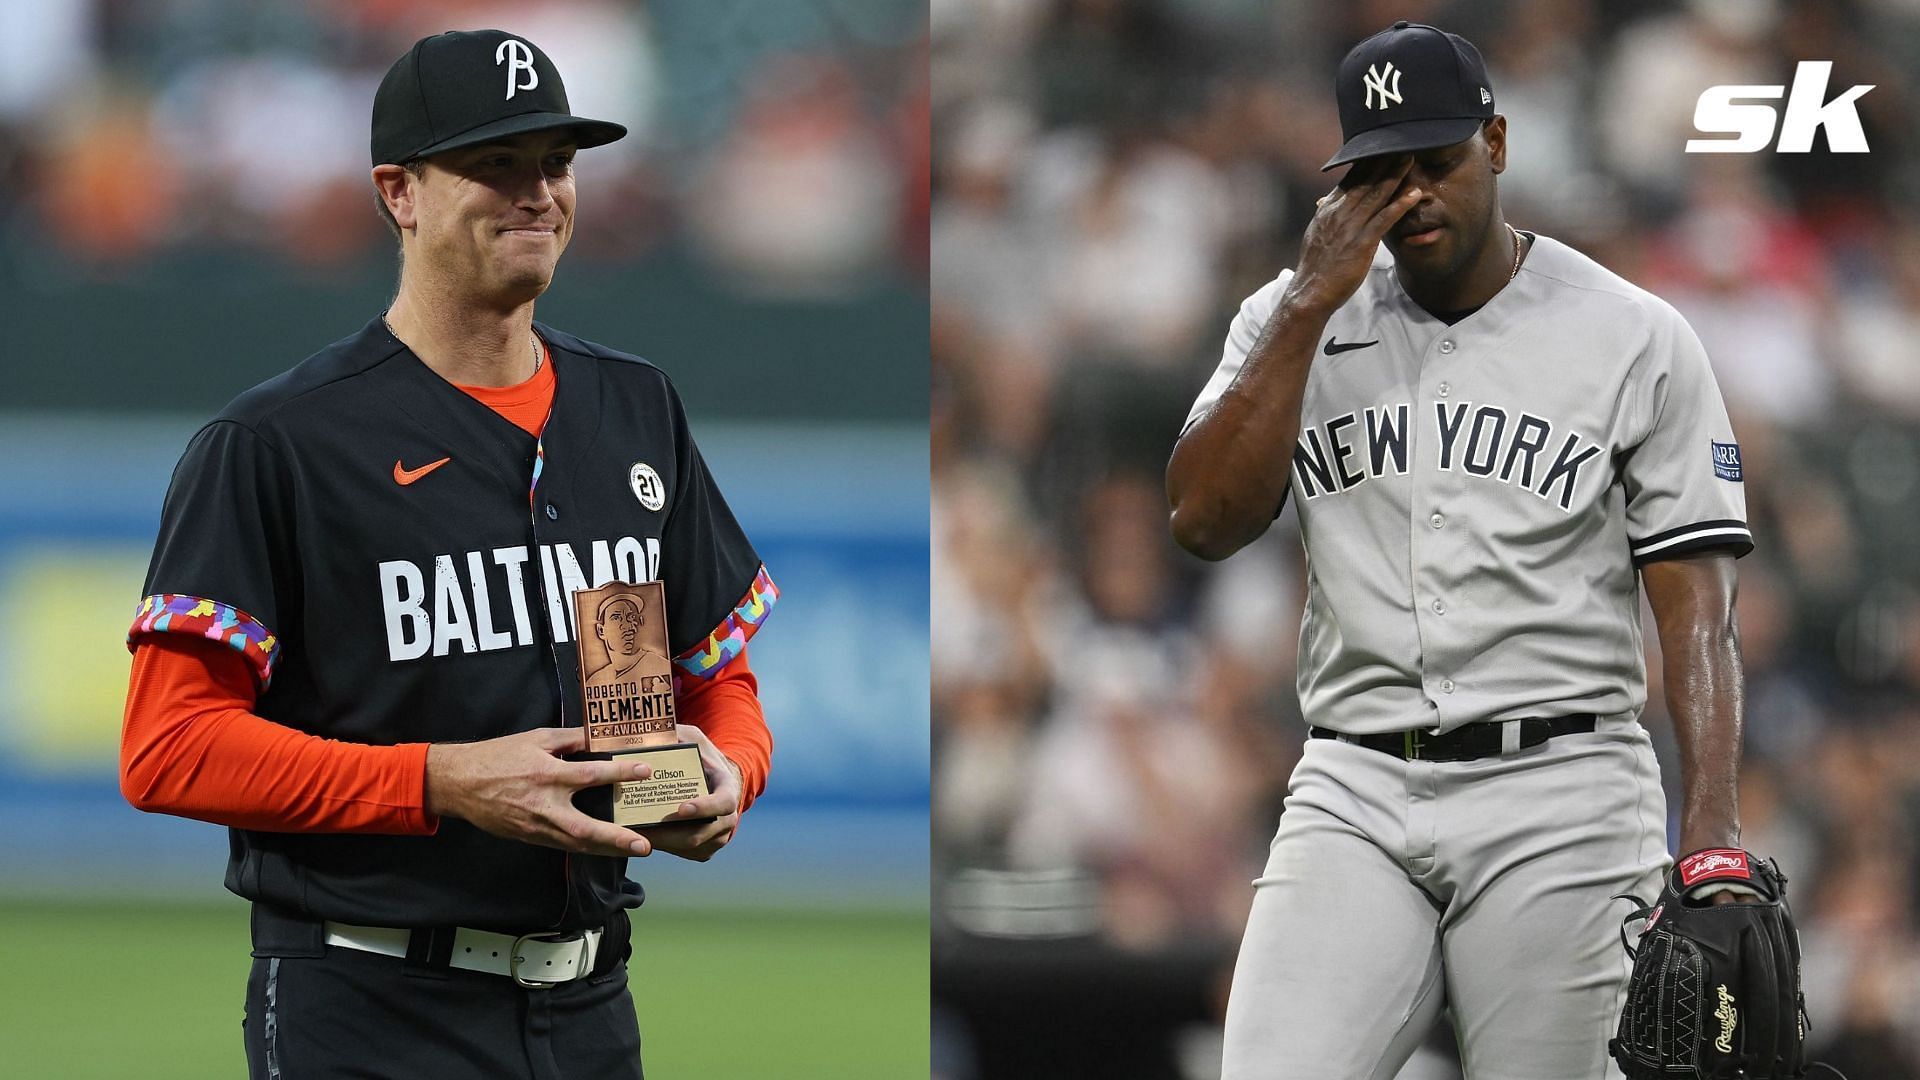 Kyle Gibson and Luis Severino are two players who may see their stock dip in the MLB fantasy rankings